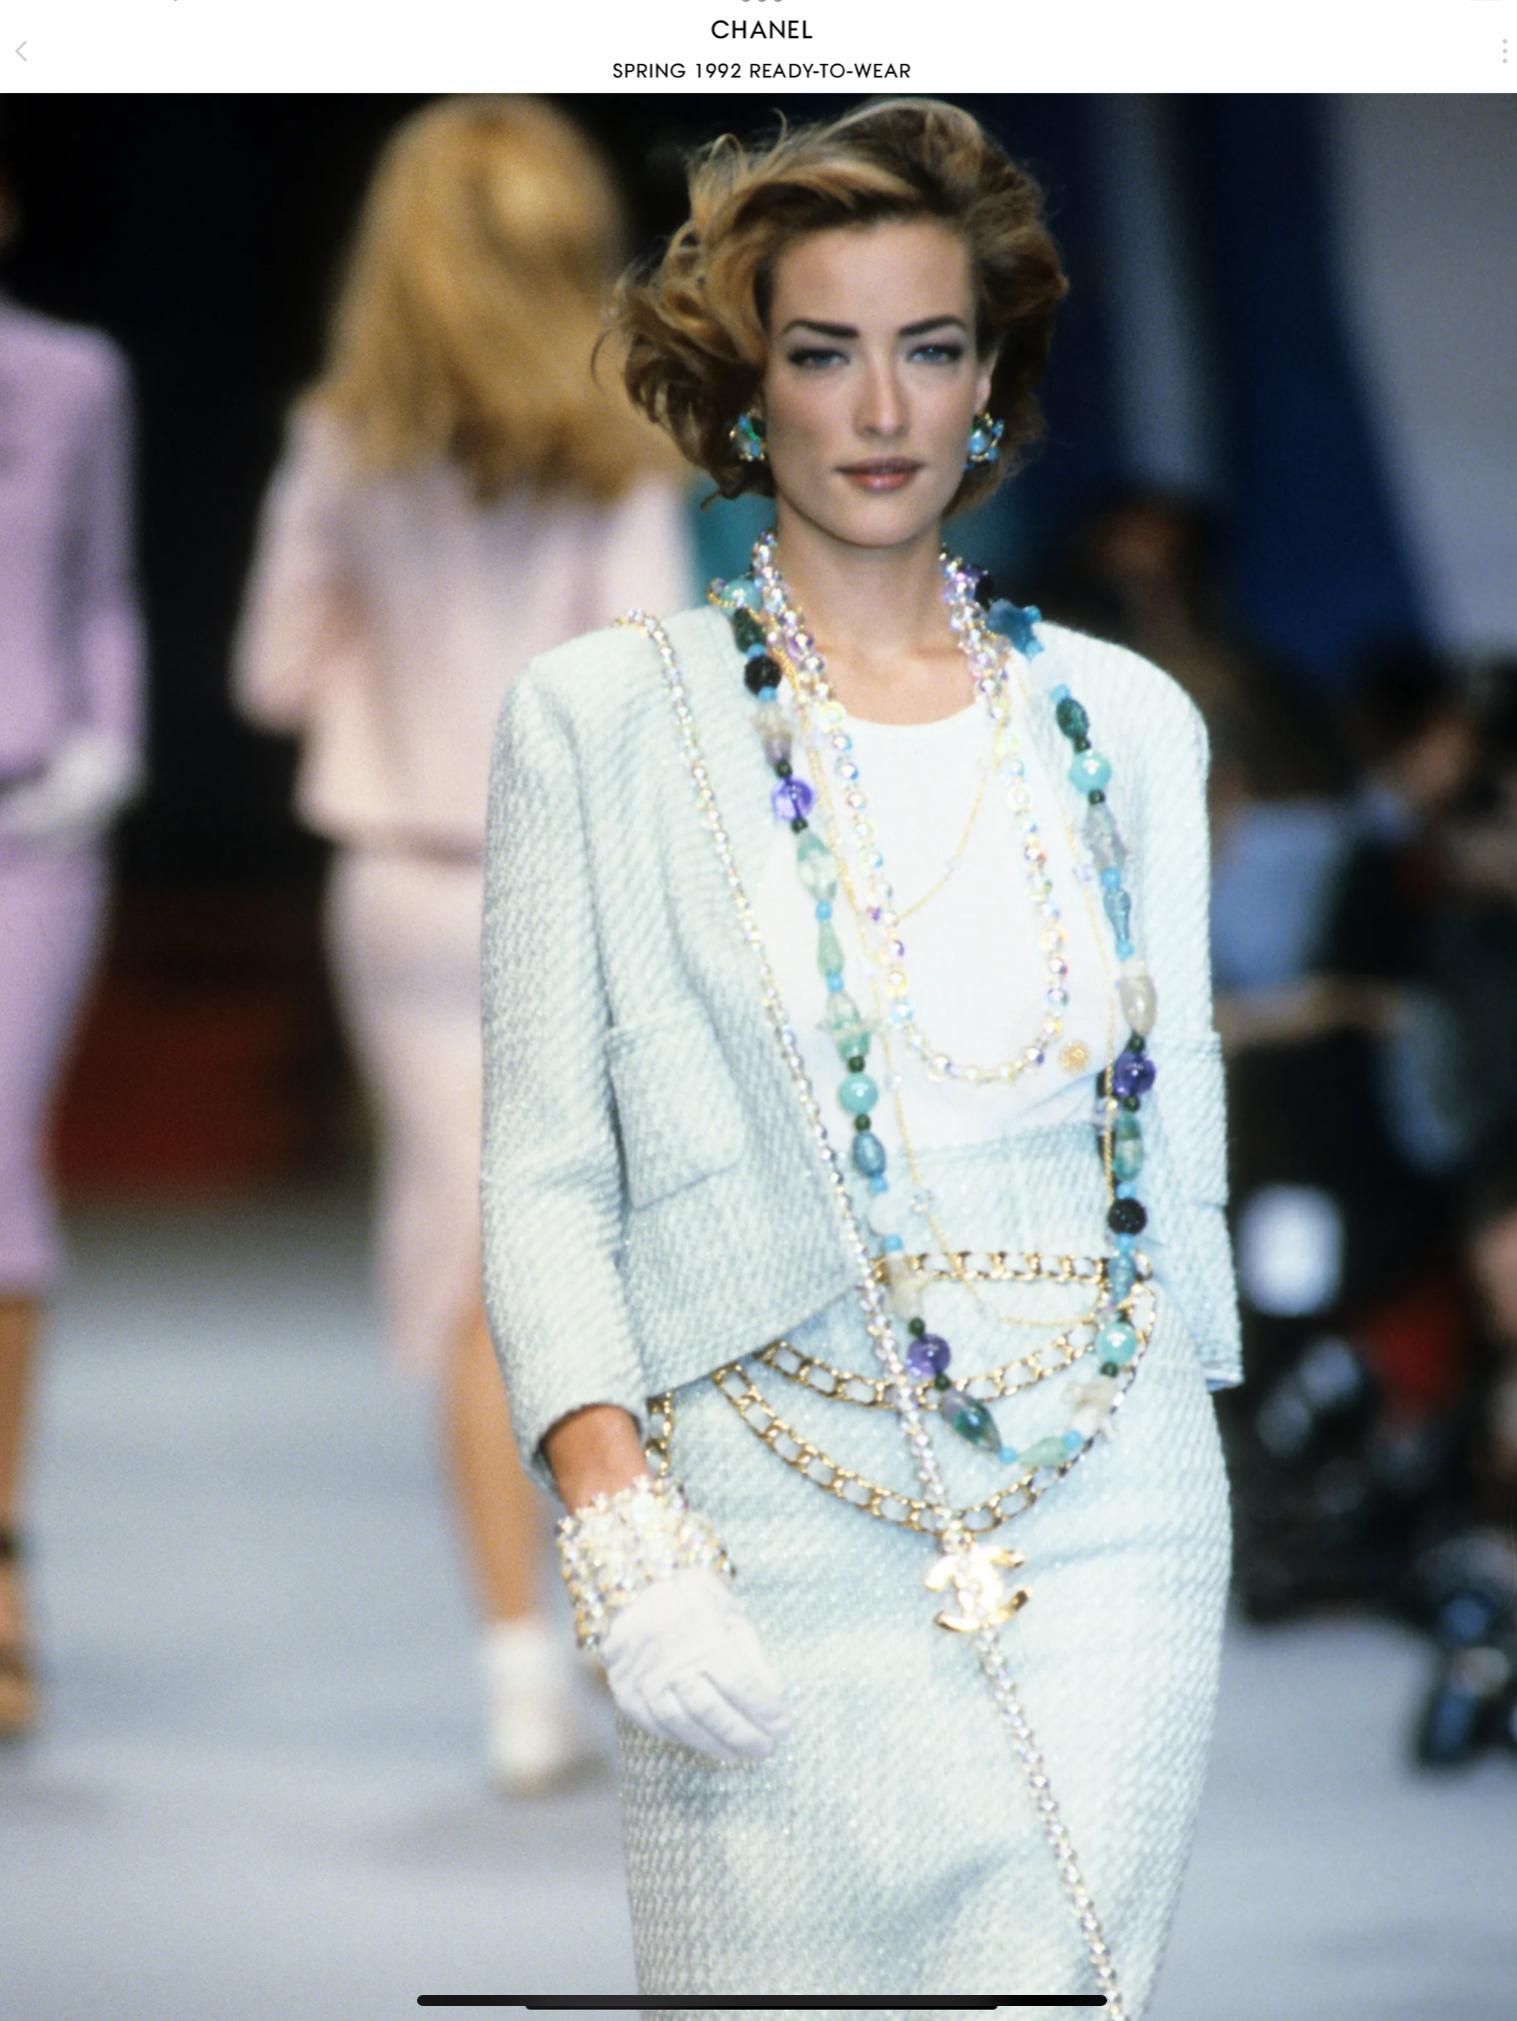 Chanel Boutique Runway Spring 1992 Ivory & Pale Turquoise Wool/Silk Woven Tweed Jacket - Size 44 on the tag however this item was altered and is equivalent more to a size 4 US. This amazing Chanel Runway Jacket was look 5 in the Spring 1992 fashion